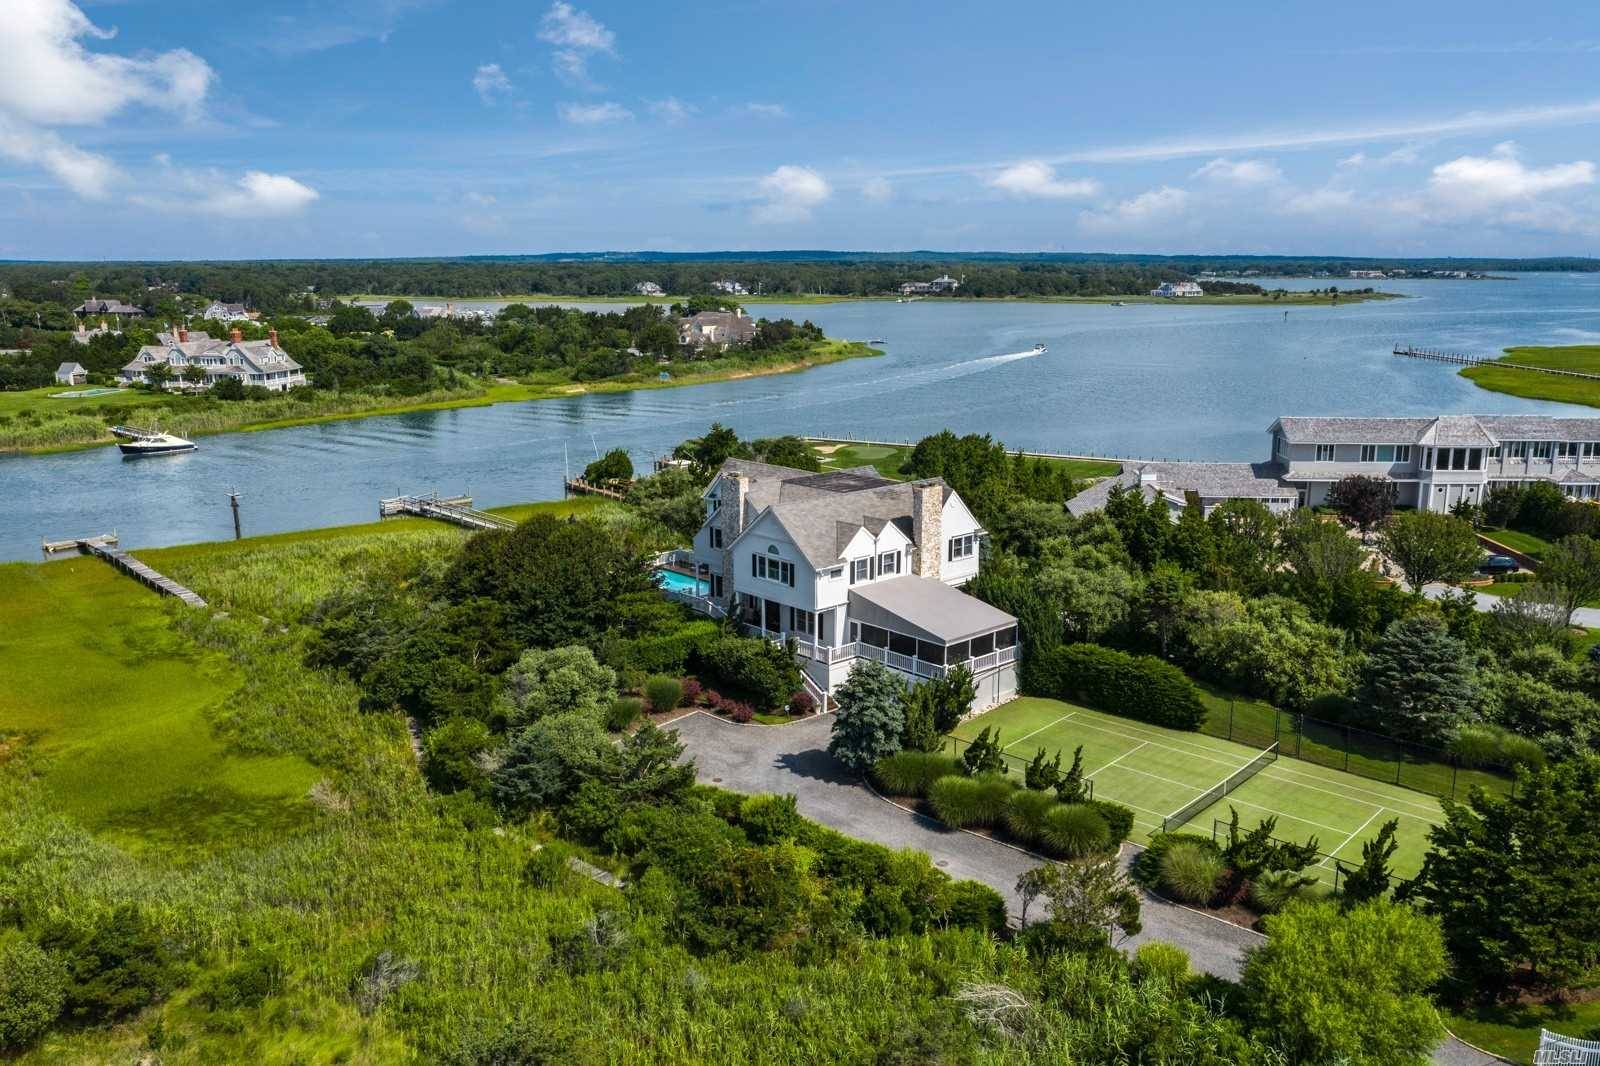 Waterfront living in the Hamptons doesn't get any better than this on 1.